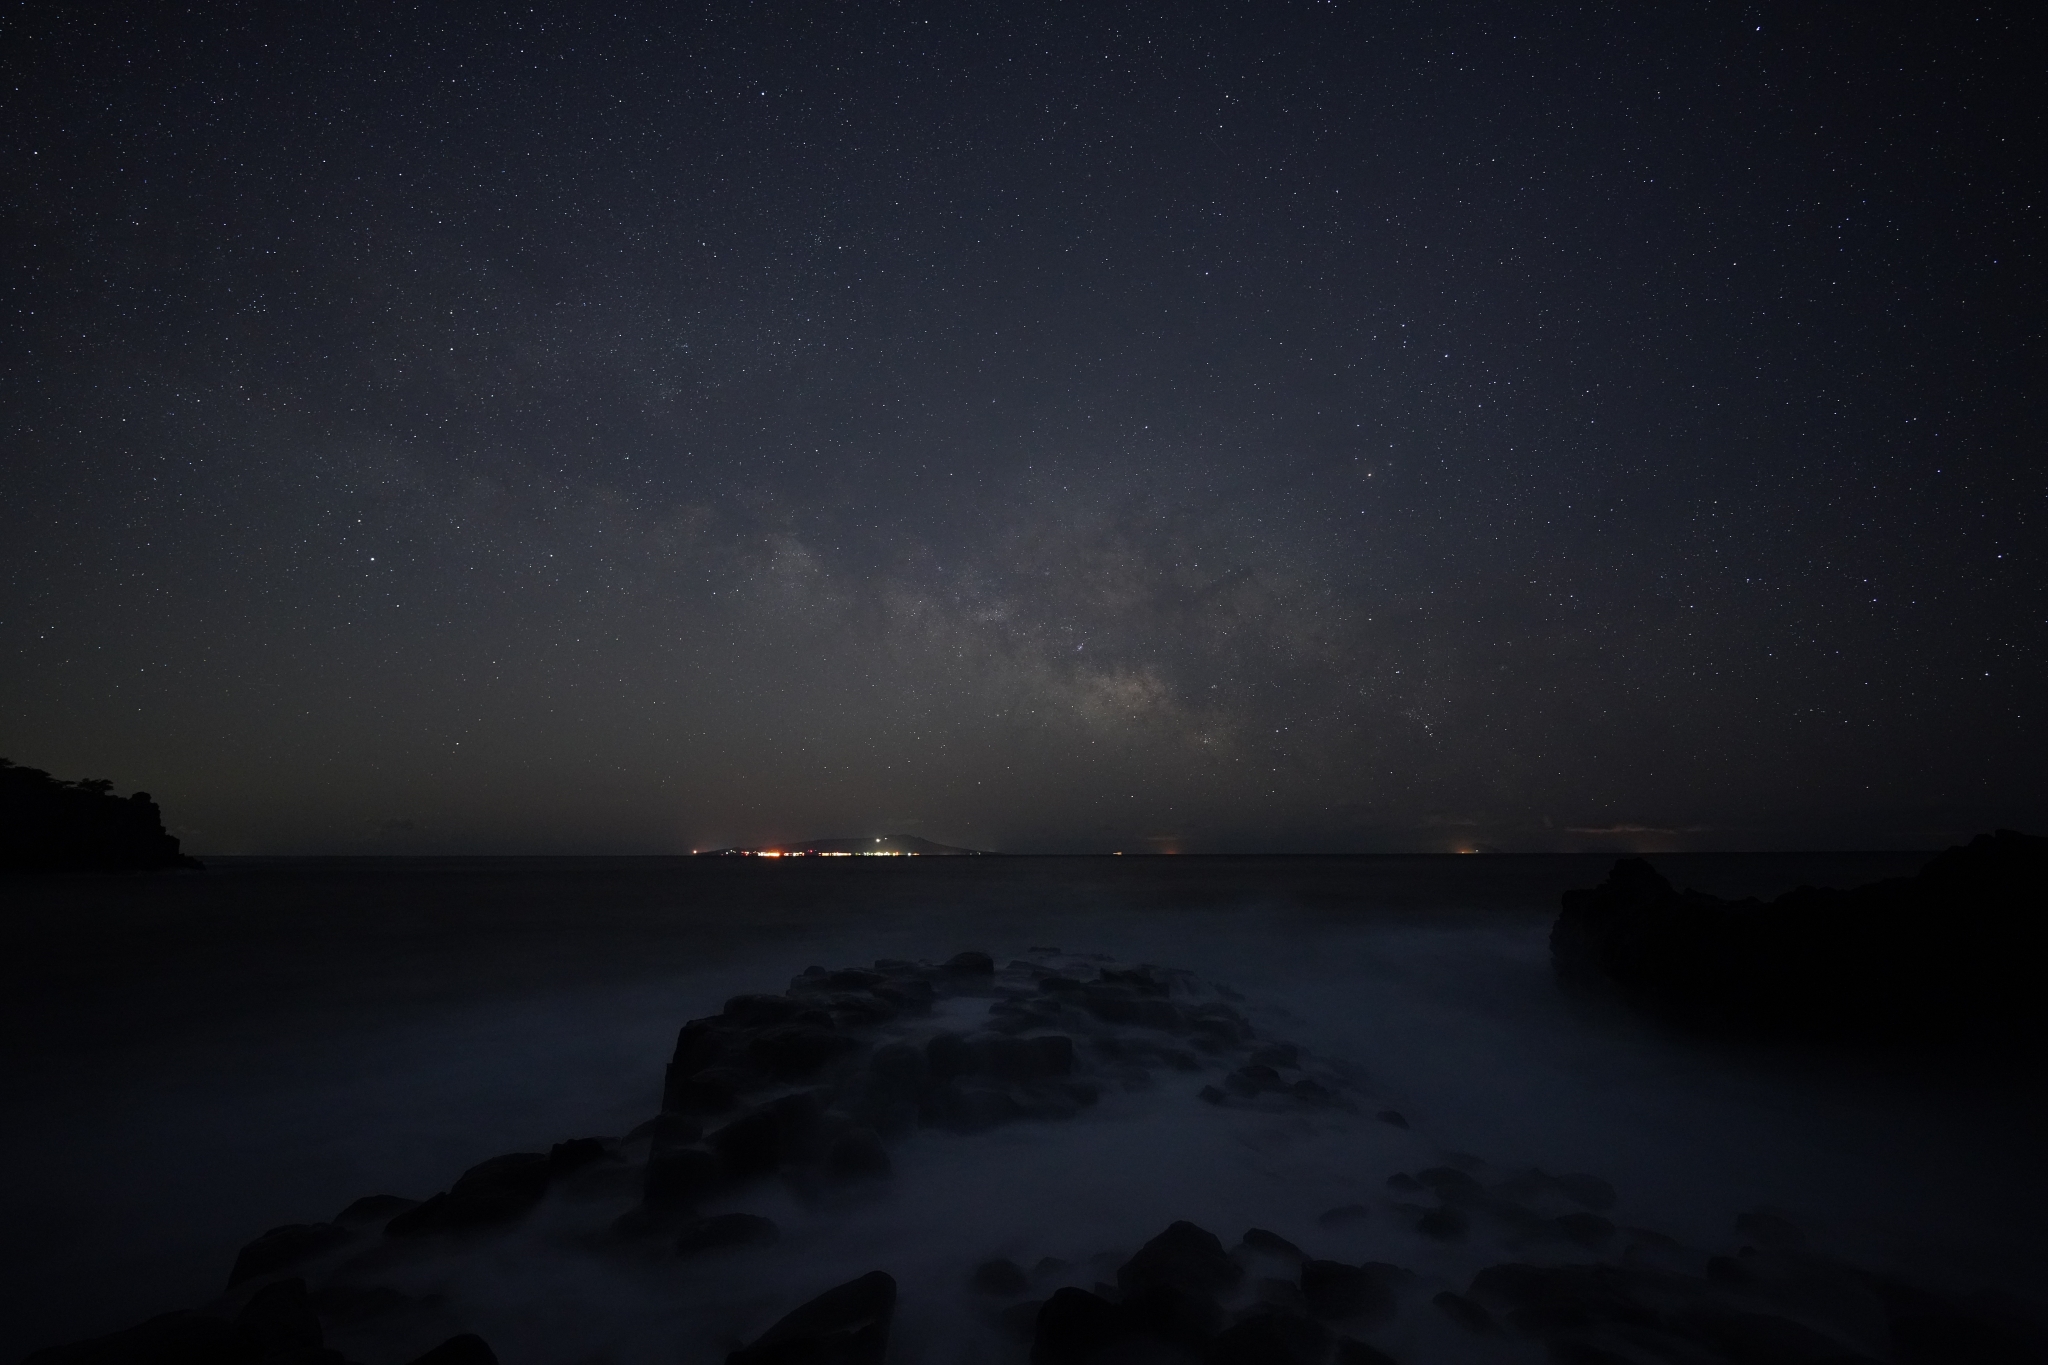 A rocky coastline at night-time with the lights of settlement in the distance